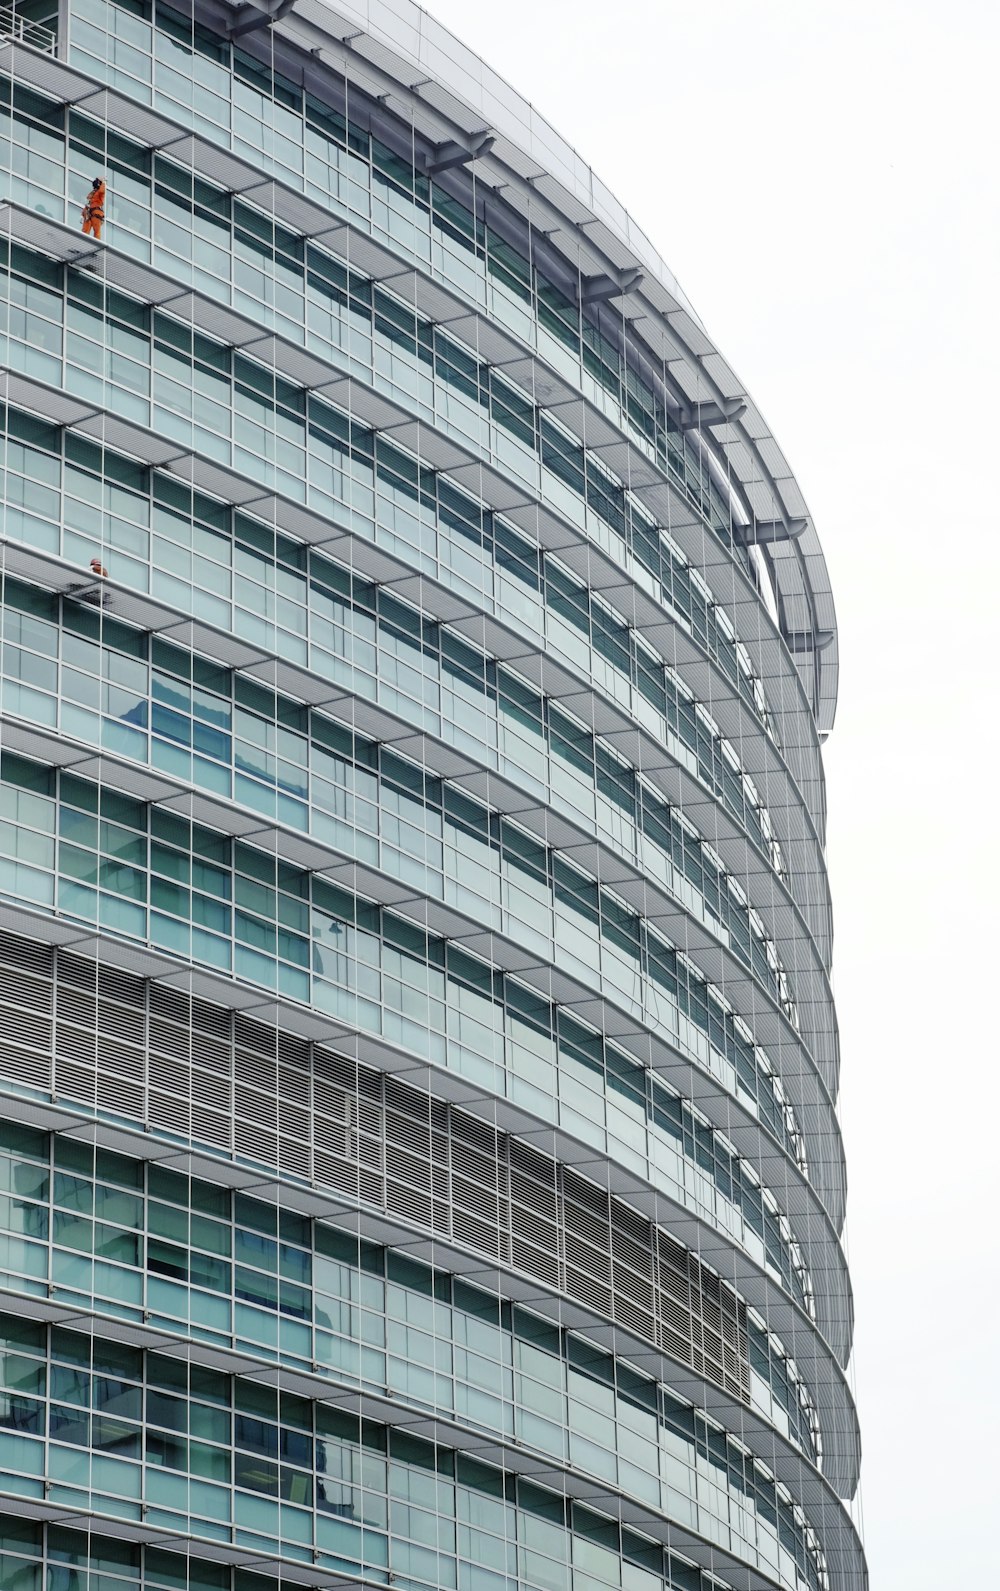 curved glass building under white sky